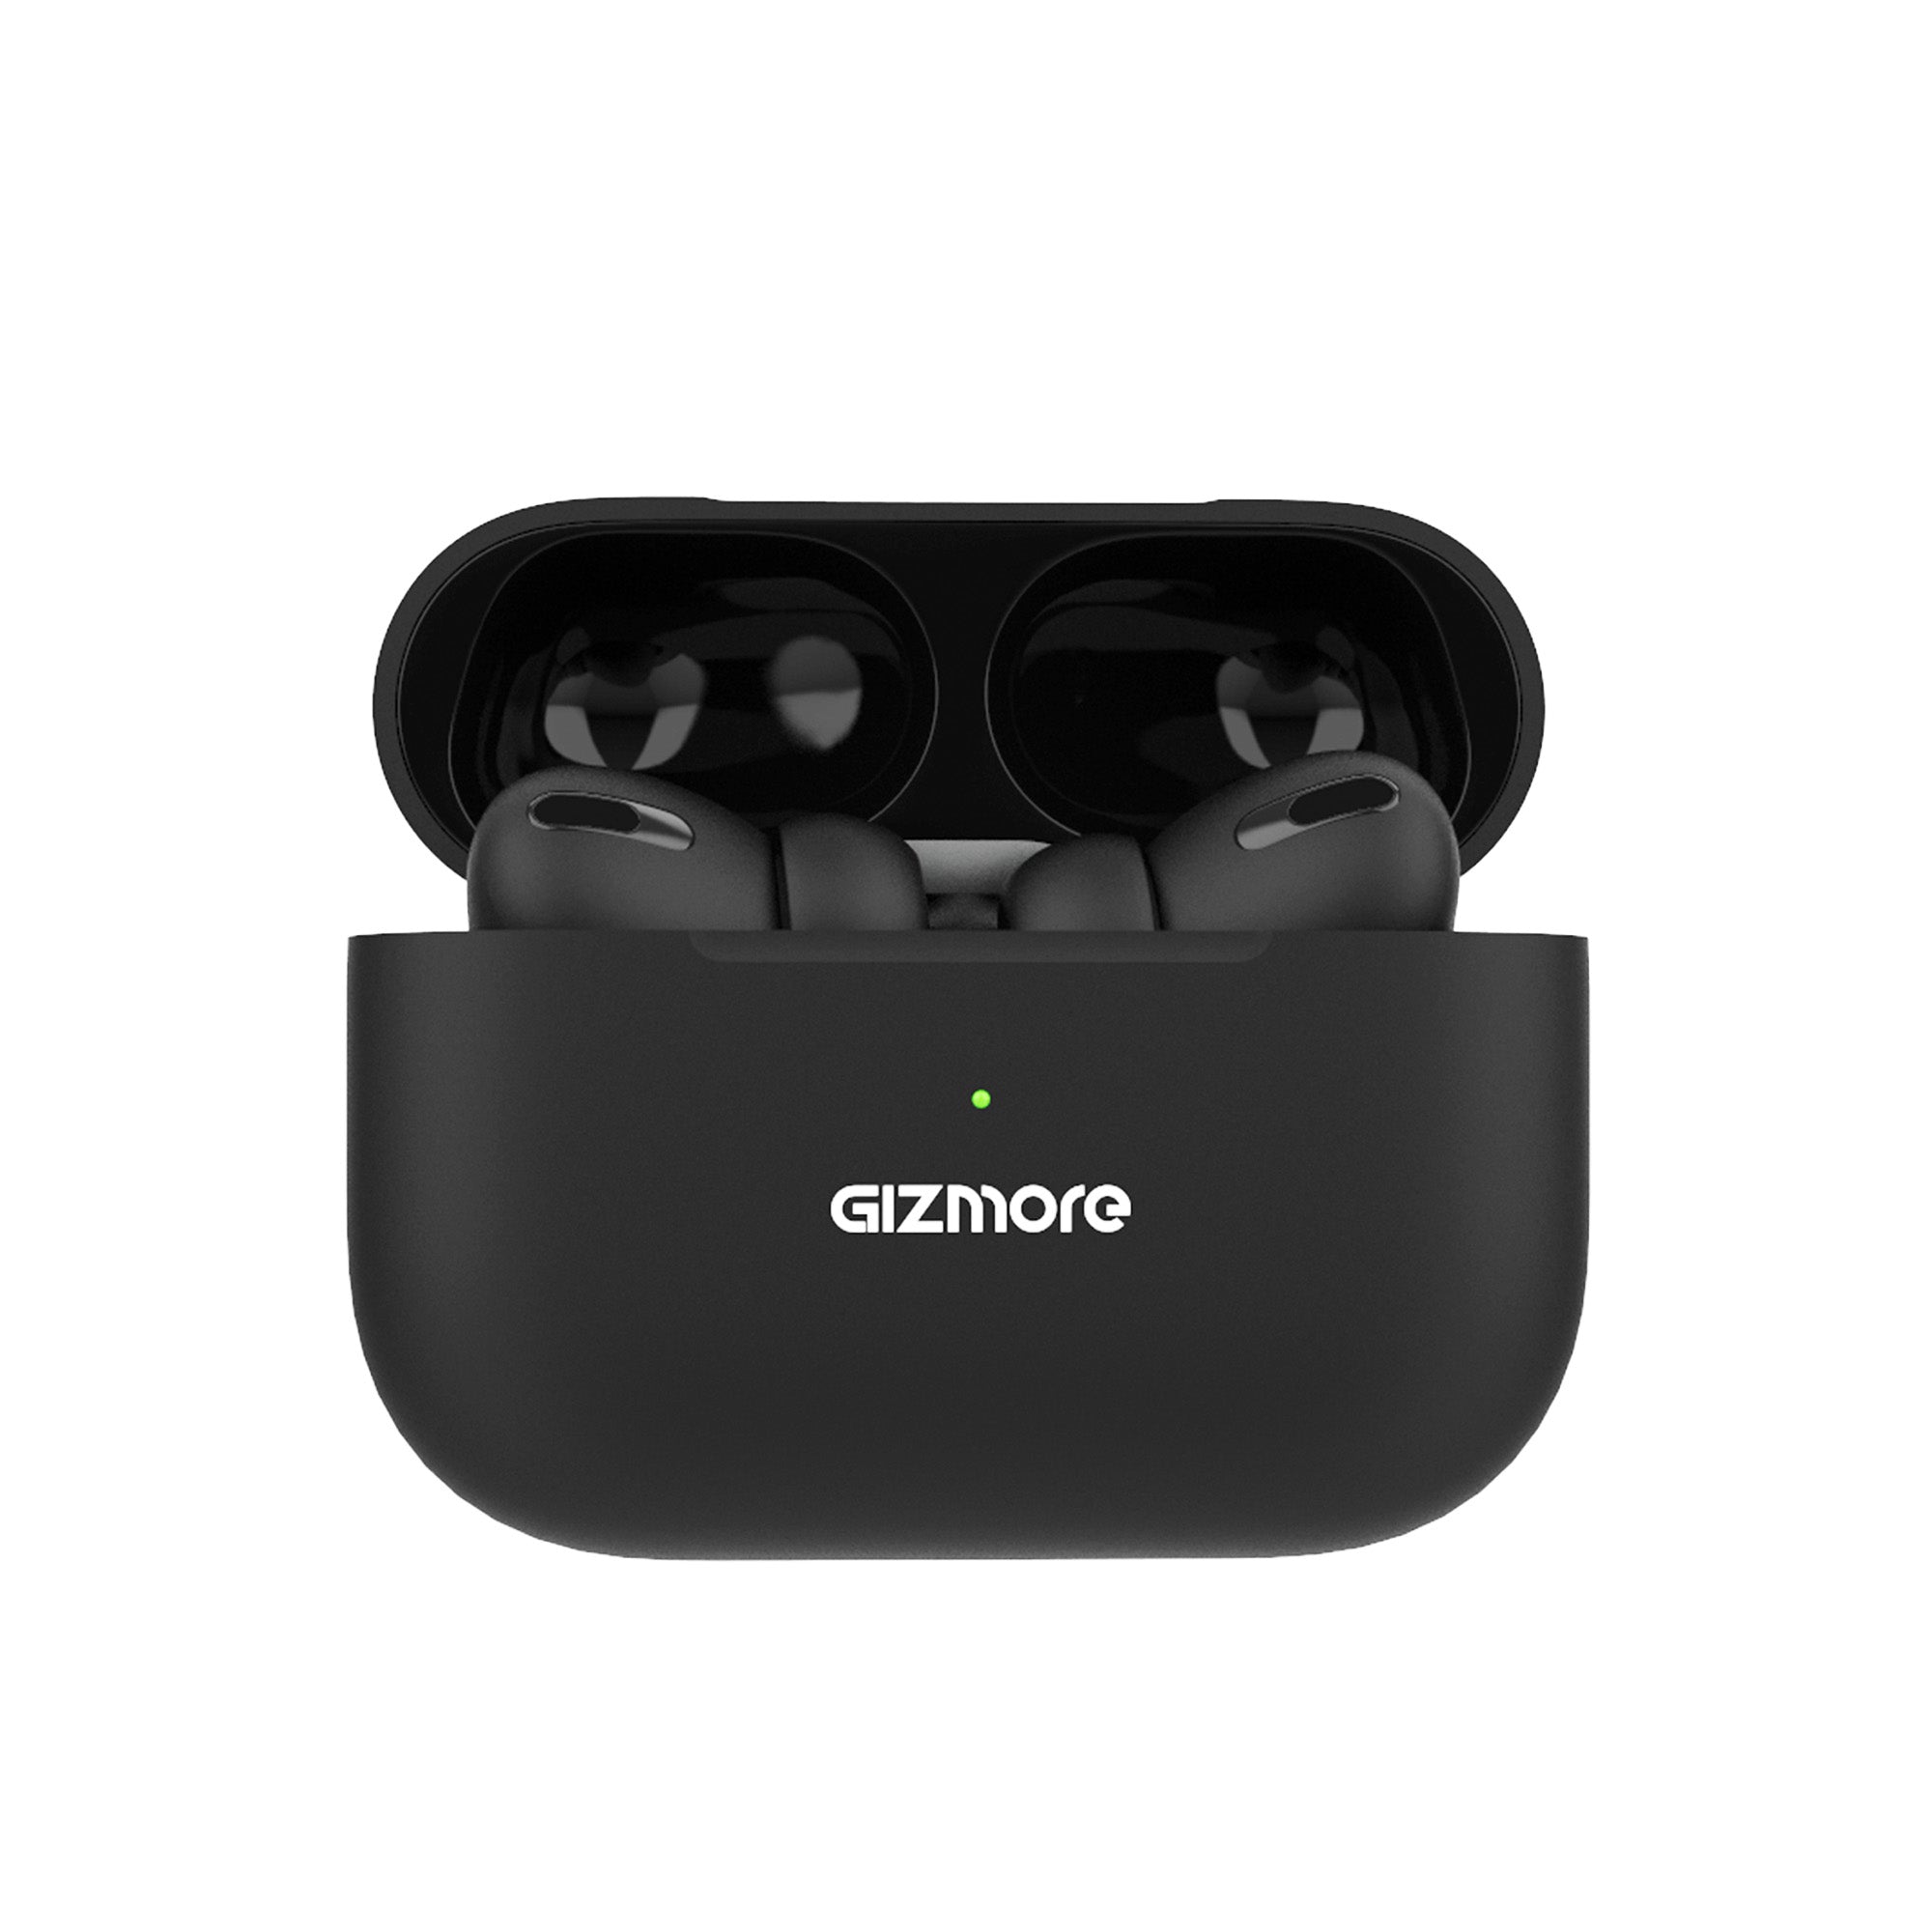 GIZMORE 871 RAGA TWS In-Ear Earbuds Wireless Charging with 20 Hours Playtime | Insta Wake N’ Pair Bluetooth V5.3| 13mm Bass Drivers | Sweat & Water Resistant | Touch Controls & Voice Assistant Earbuds